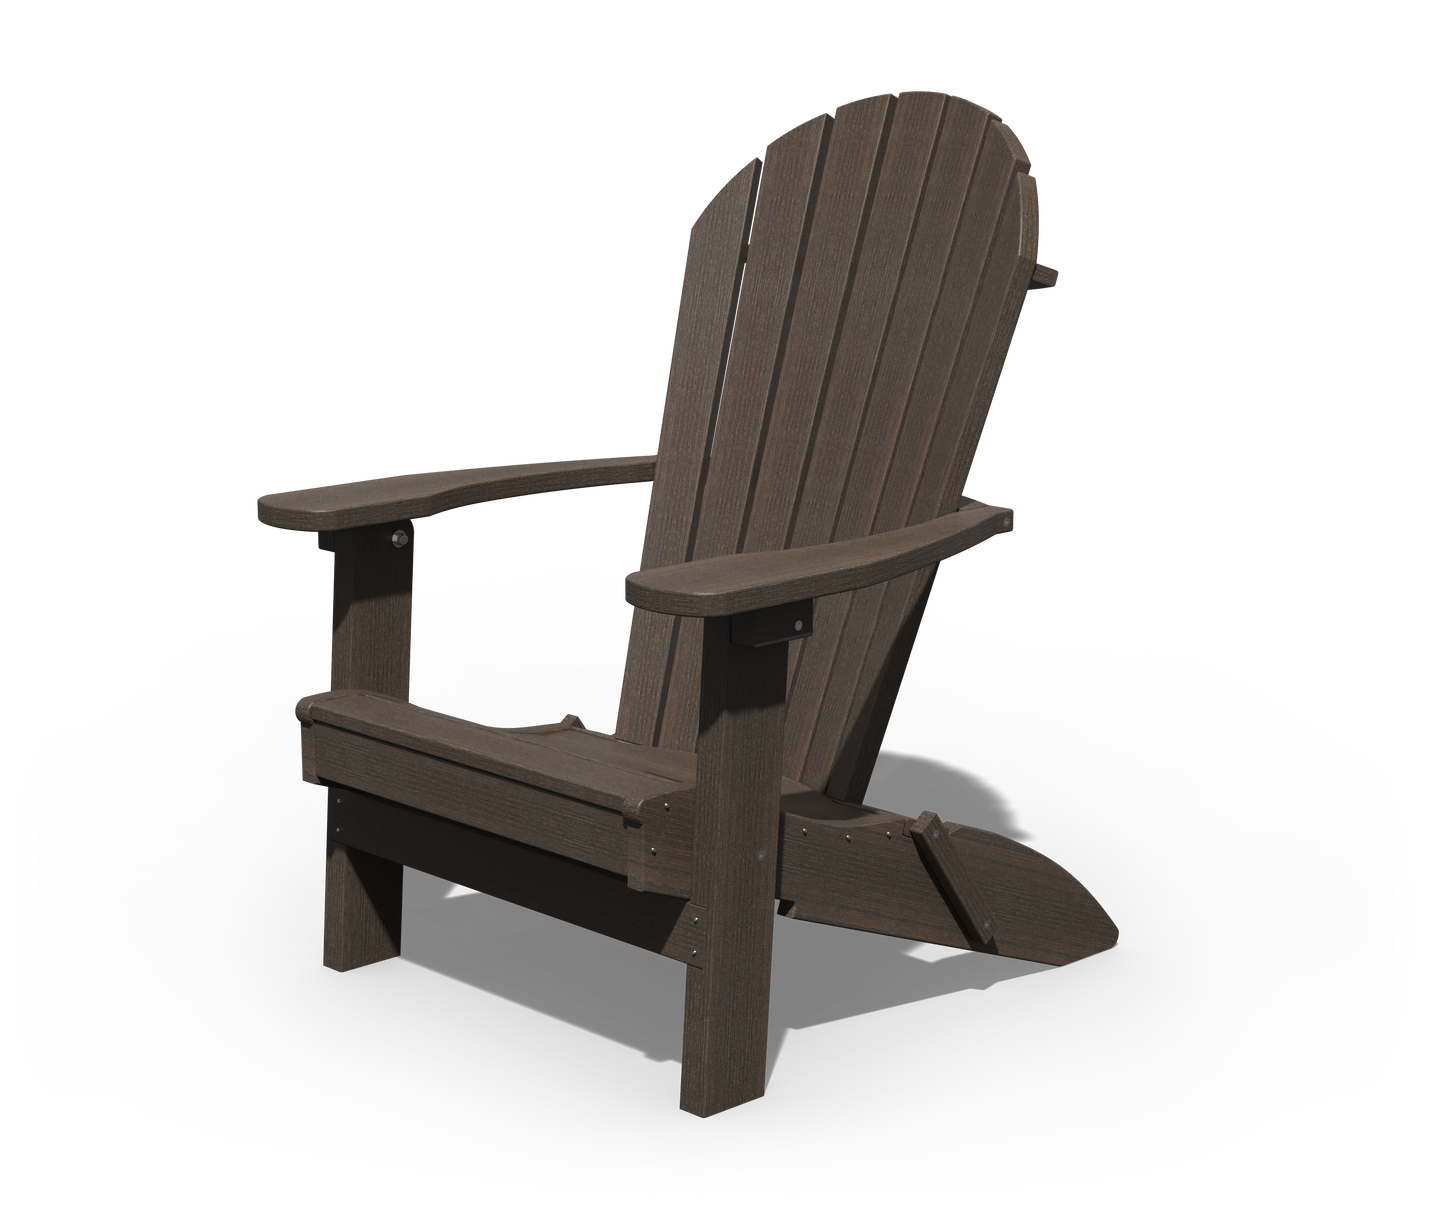 Patiova Recycled Plastic Amish Crafted Adirondack Folding Chair - LEAD TIME TO SHIP 4 WEEKS